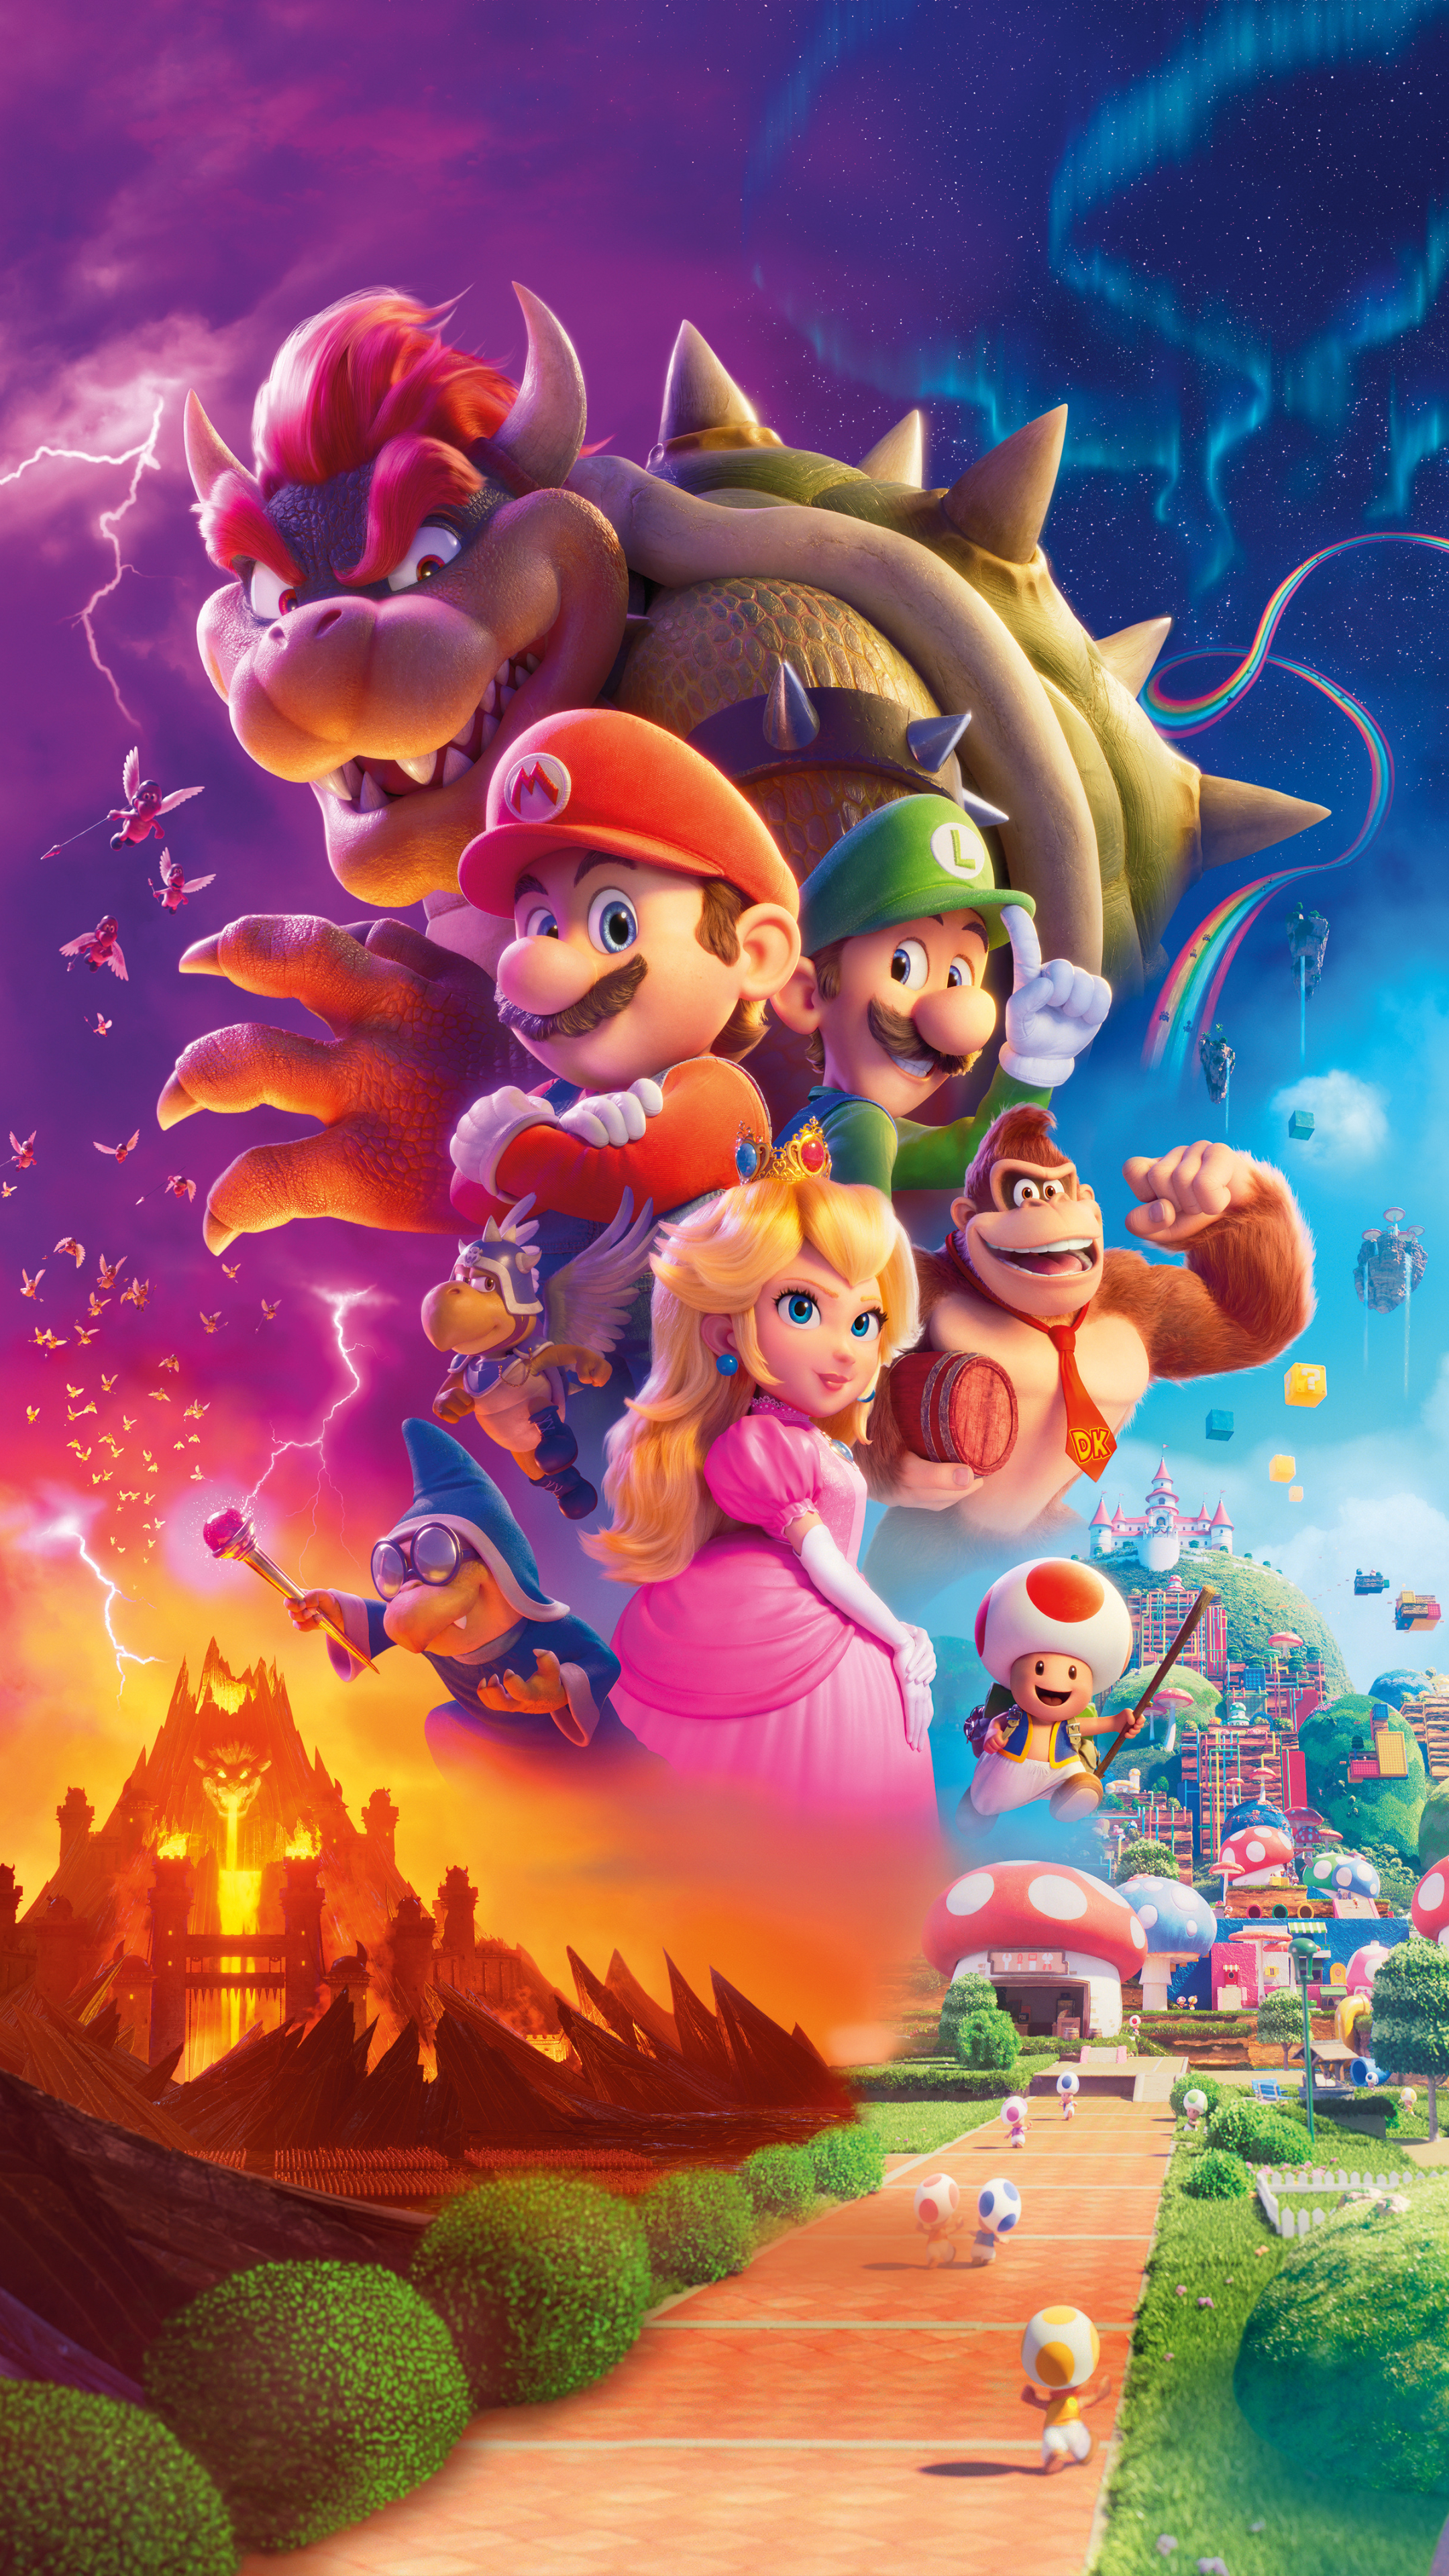 Super Mario phone wallpapers  collection 21  Super mario art Mario art  Funny iphone wallpaper